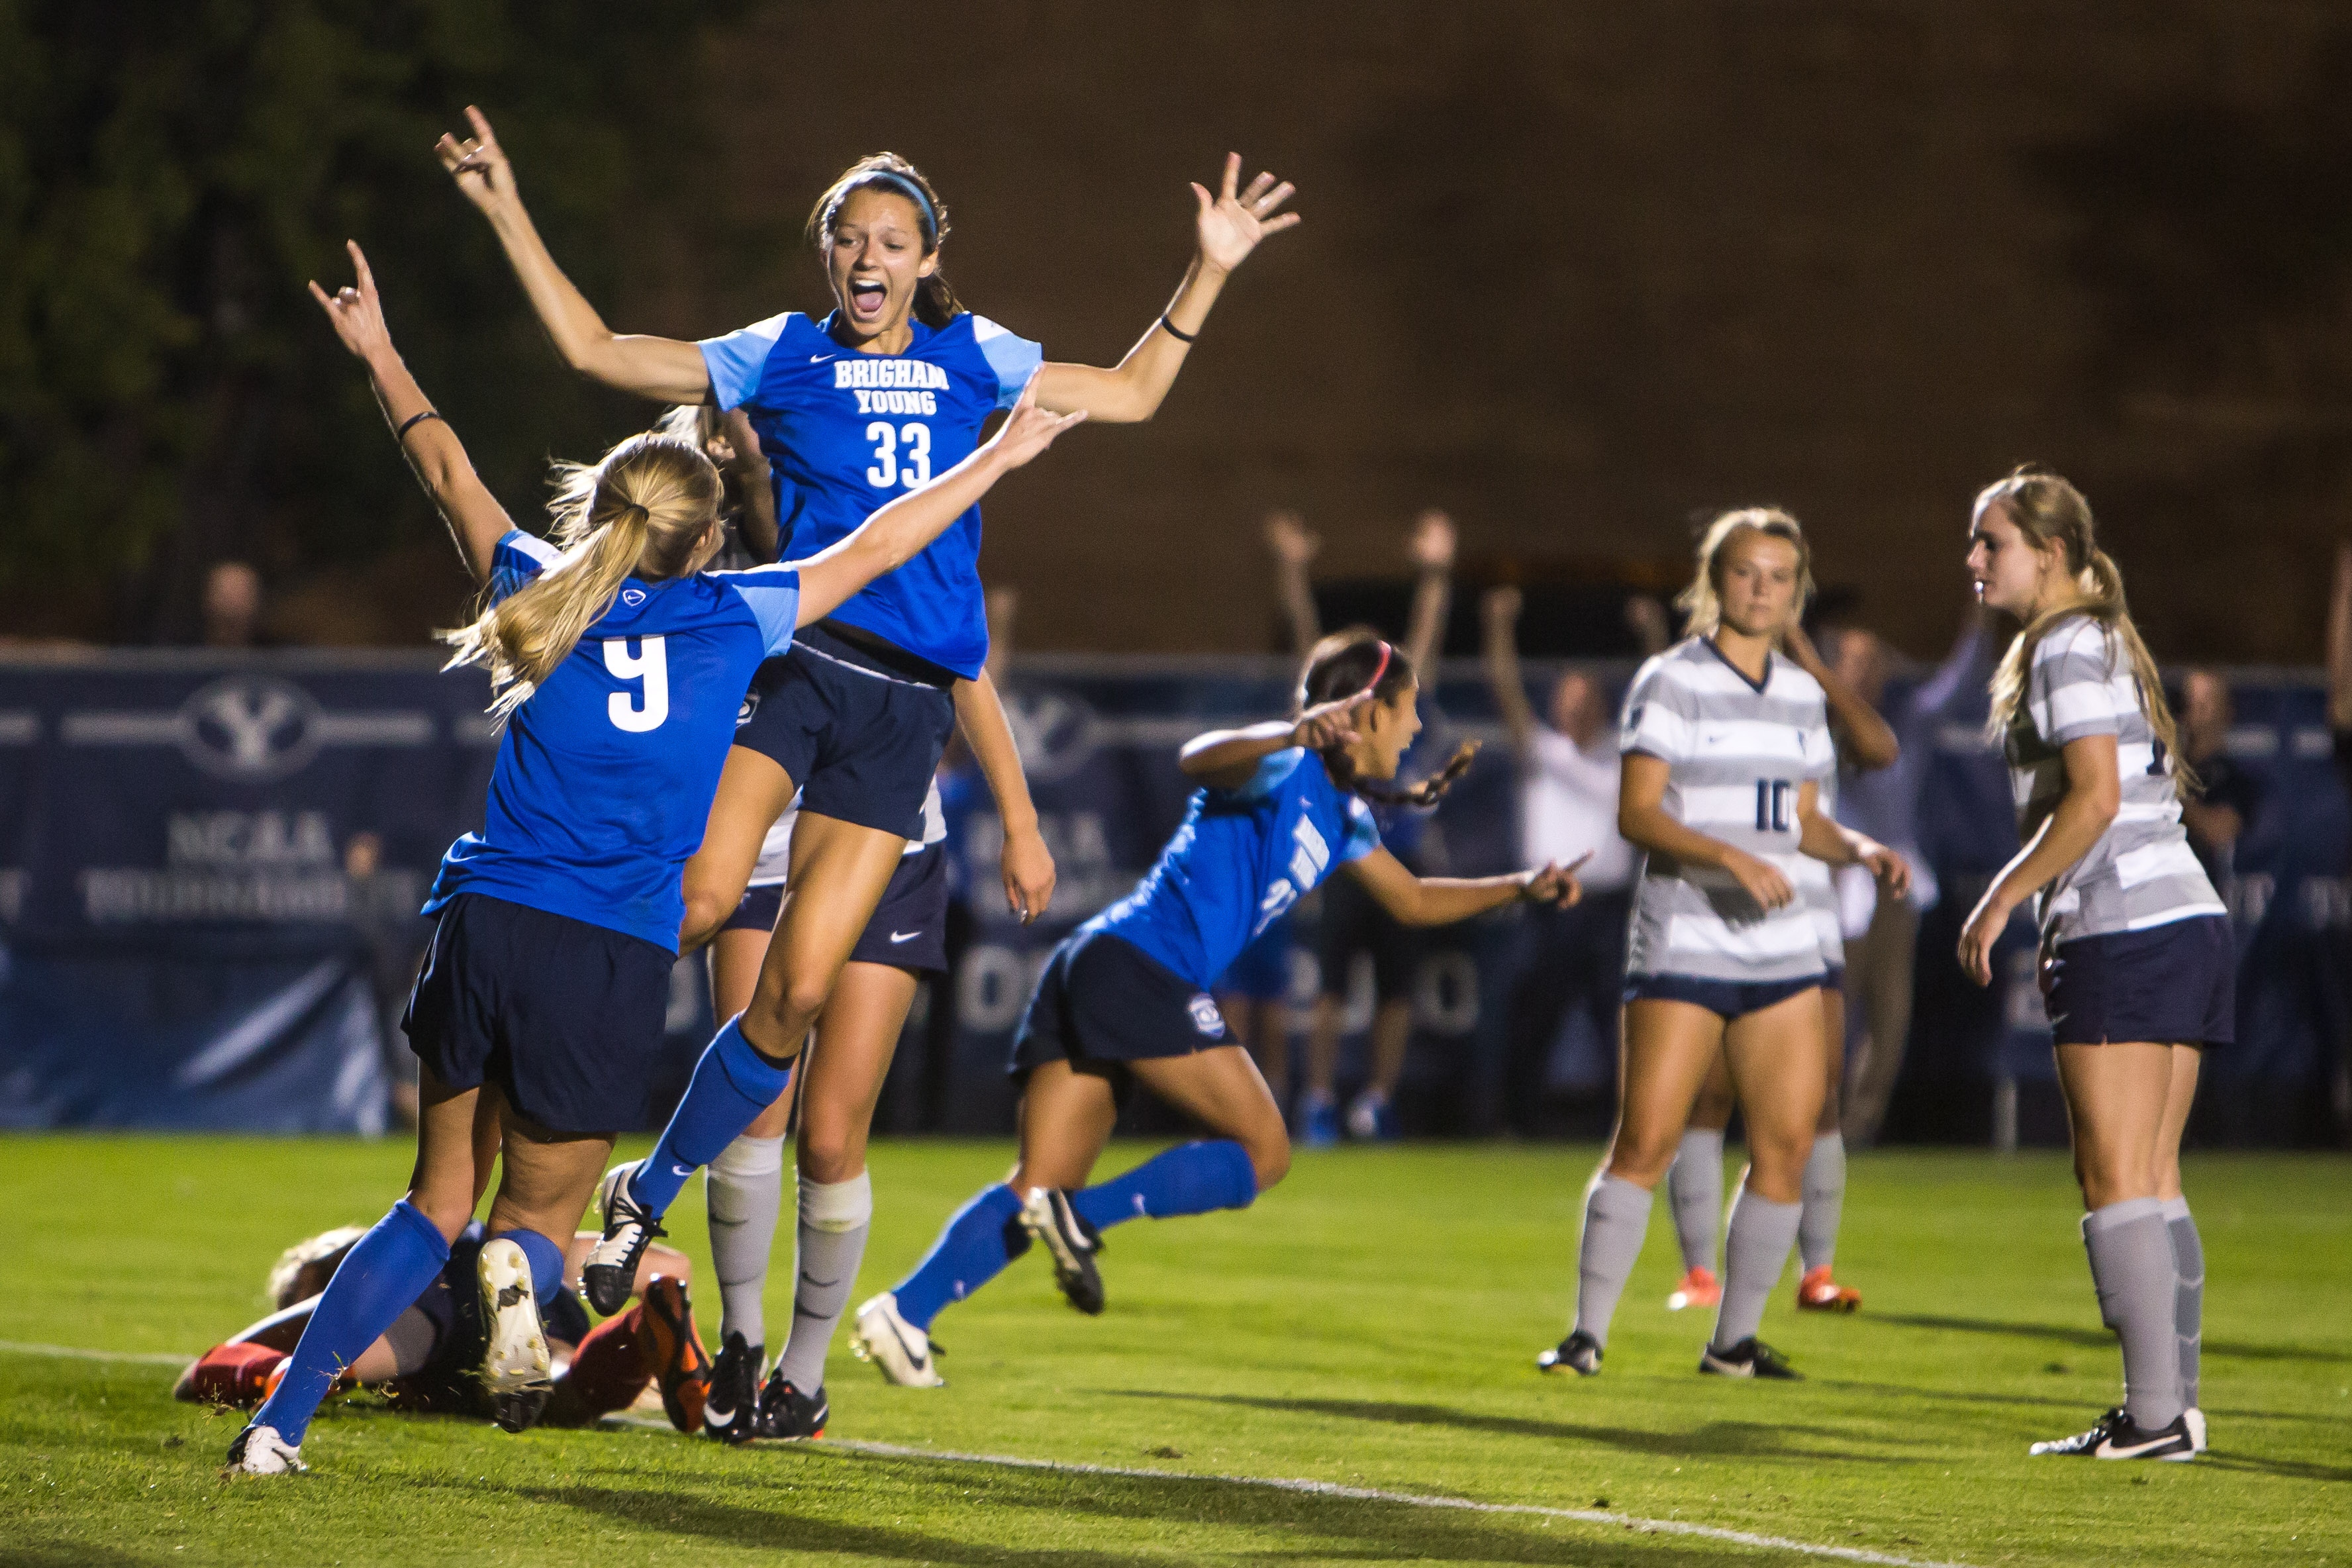 BYU women's soccer team prepares for paramount season - The Daily Universe